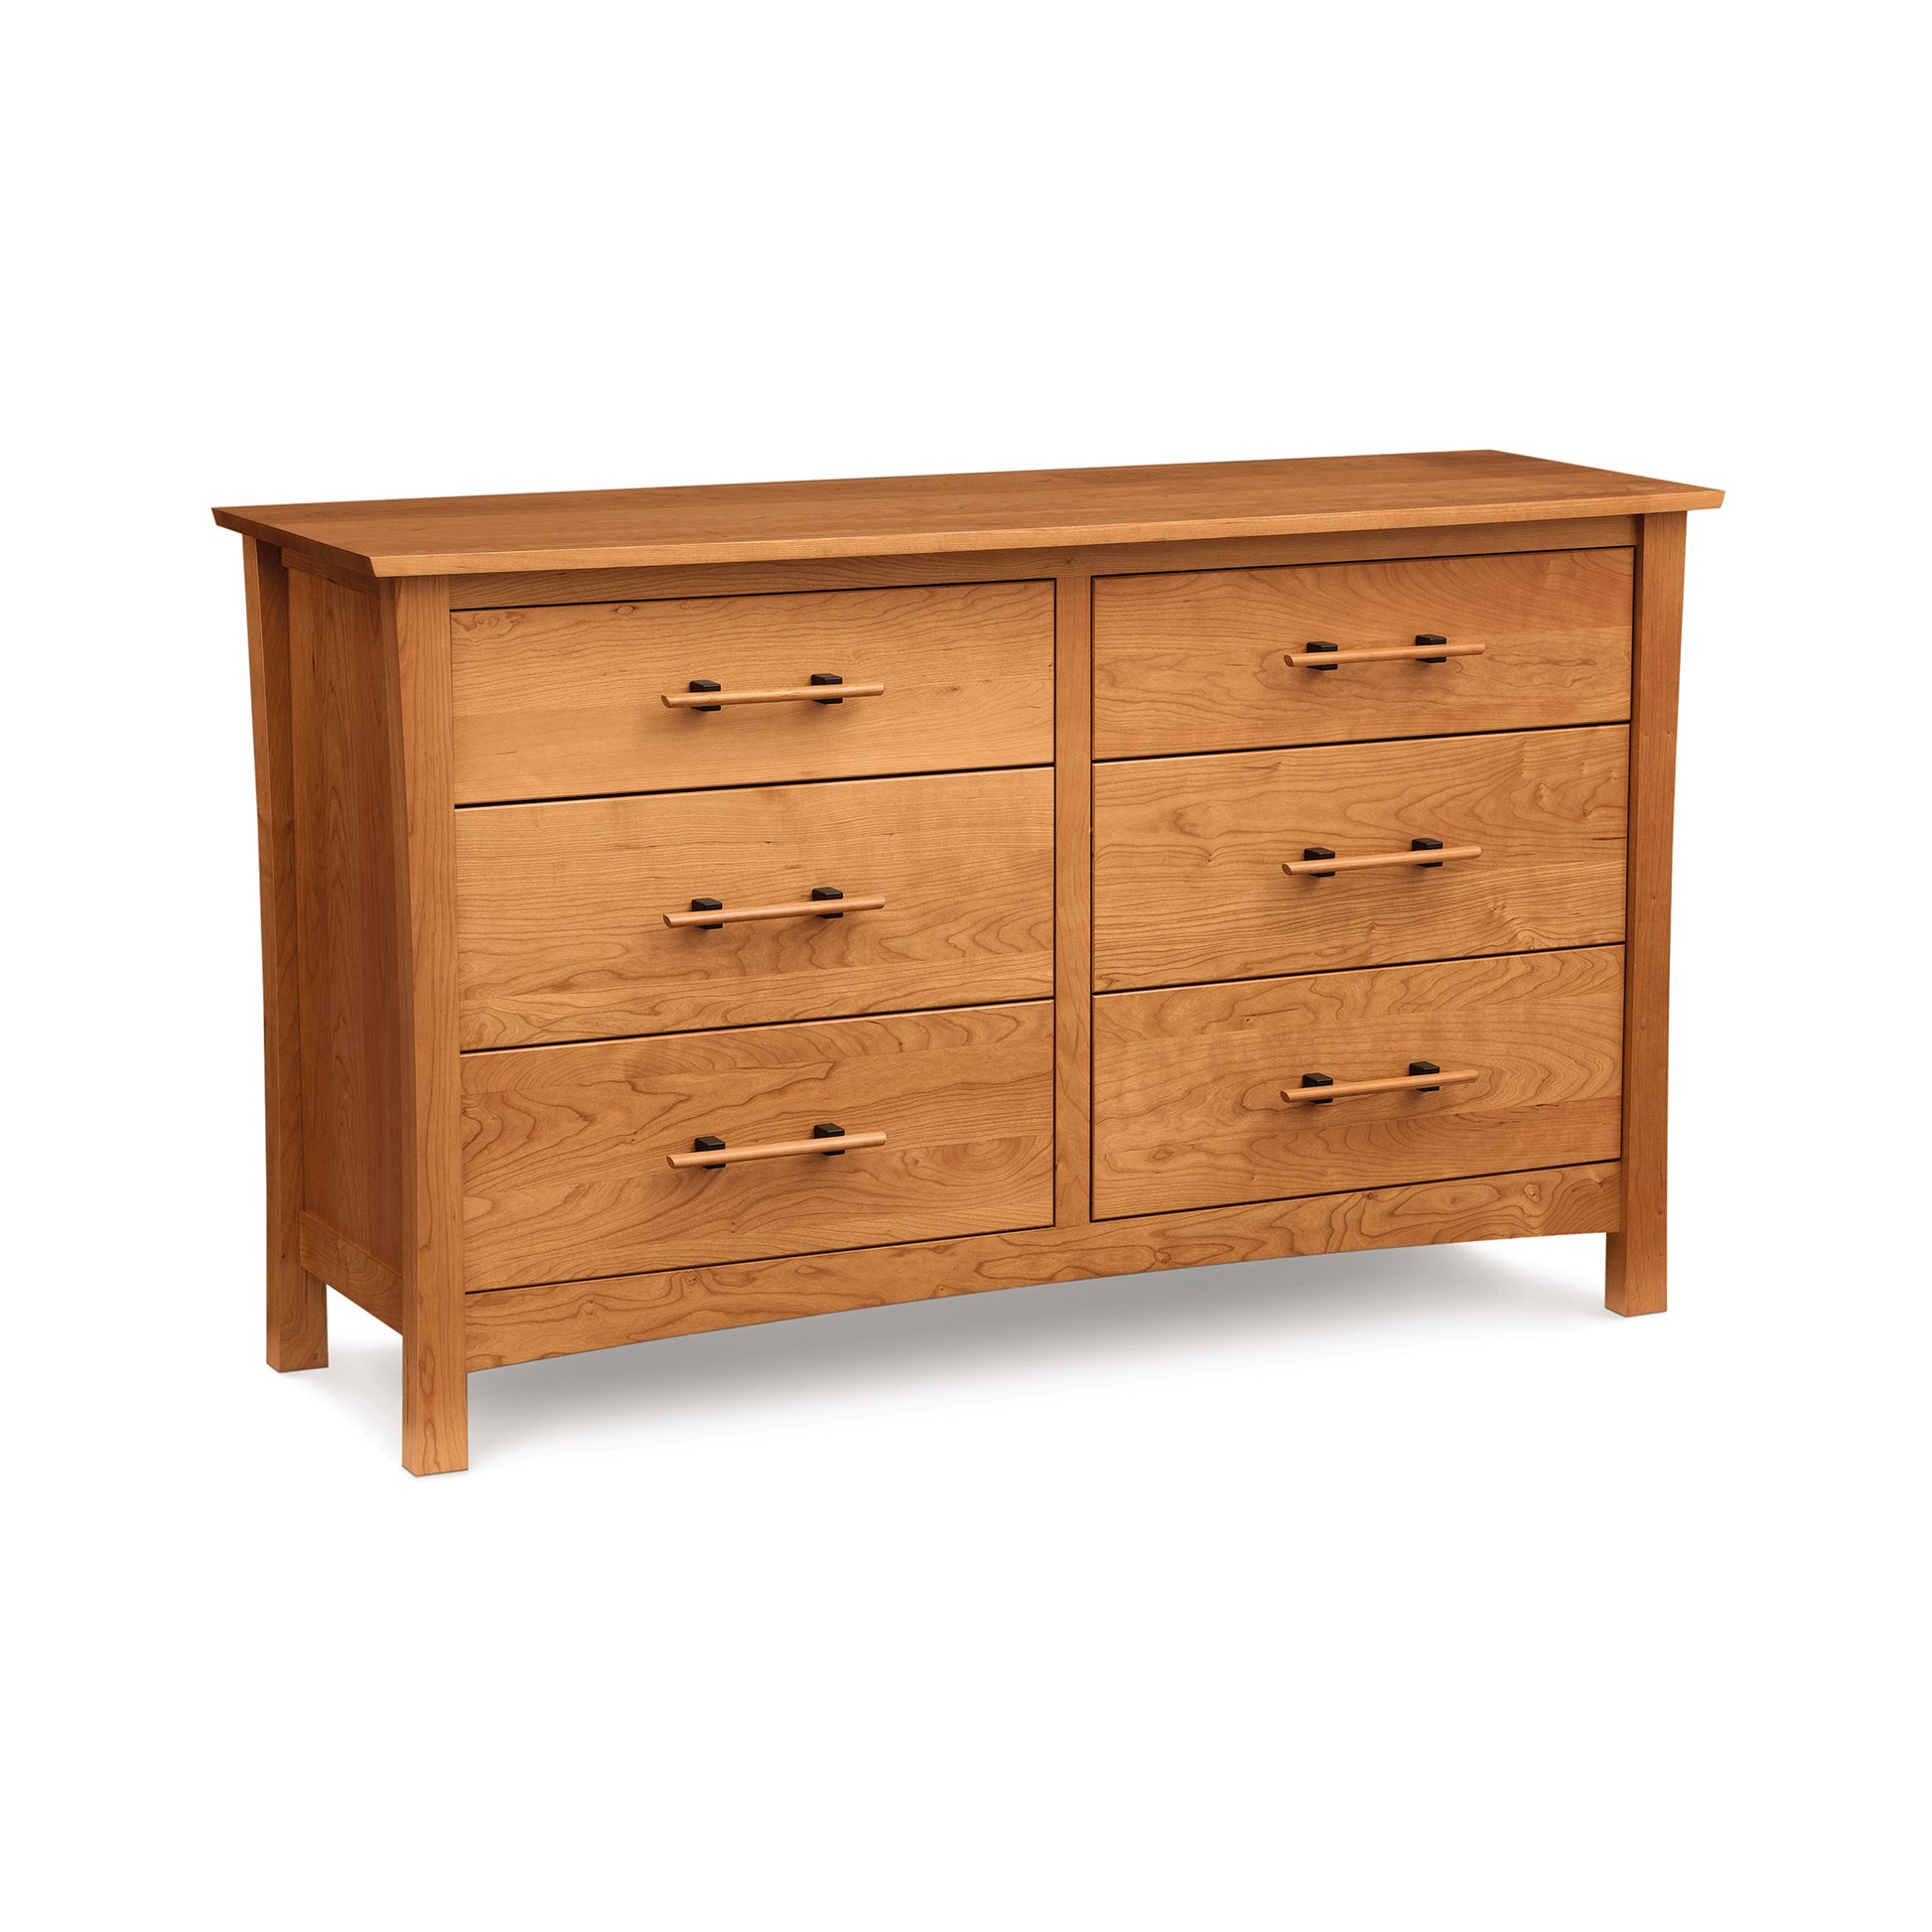 Monterey 6-Drawer Dresser by Copeland Furniture isolated on a white background.